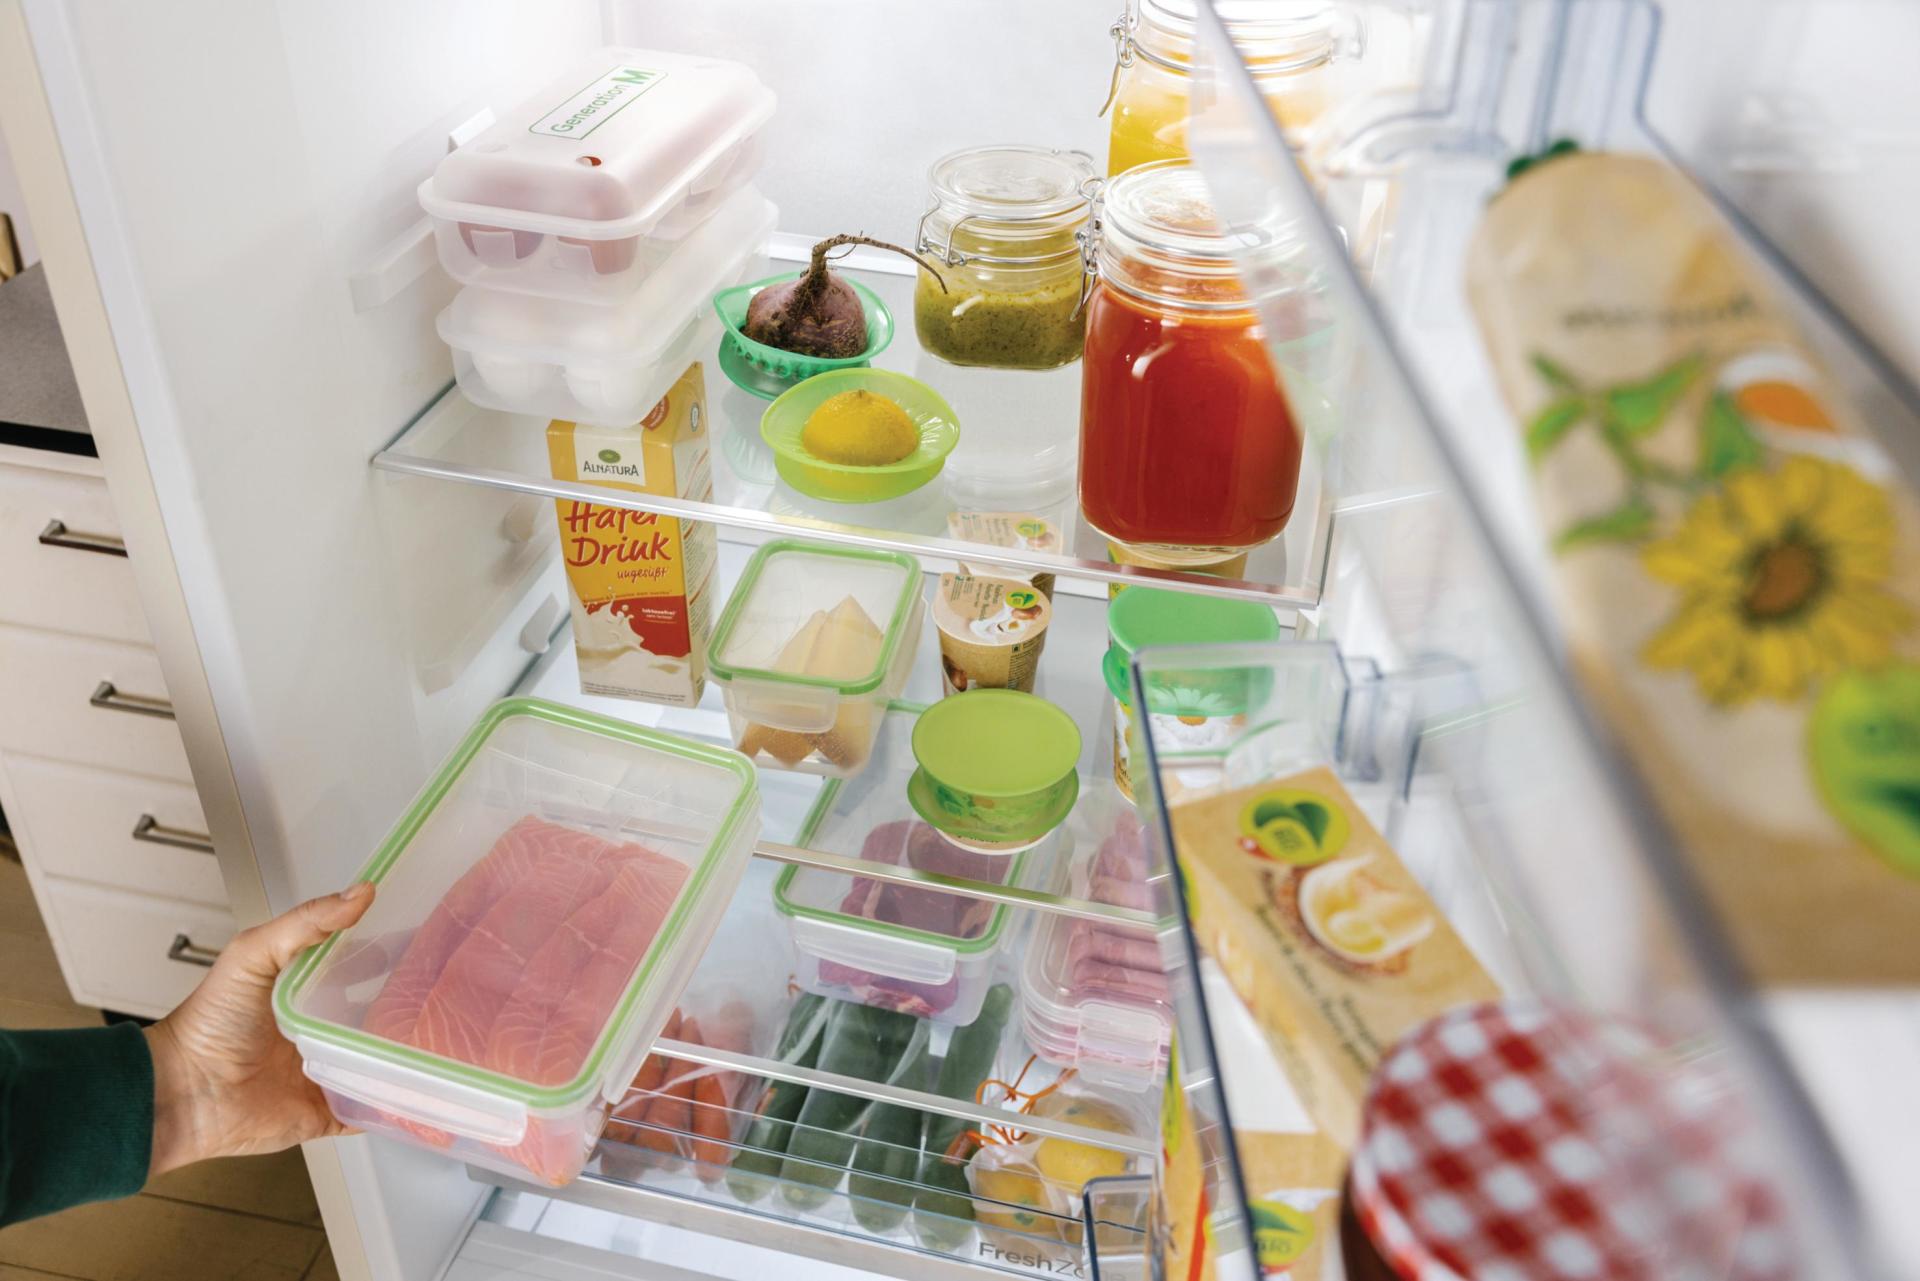 An open refrigerator door gives a clear view of neatly filled food